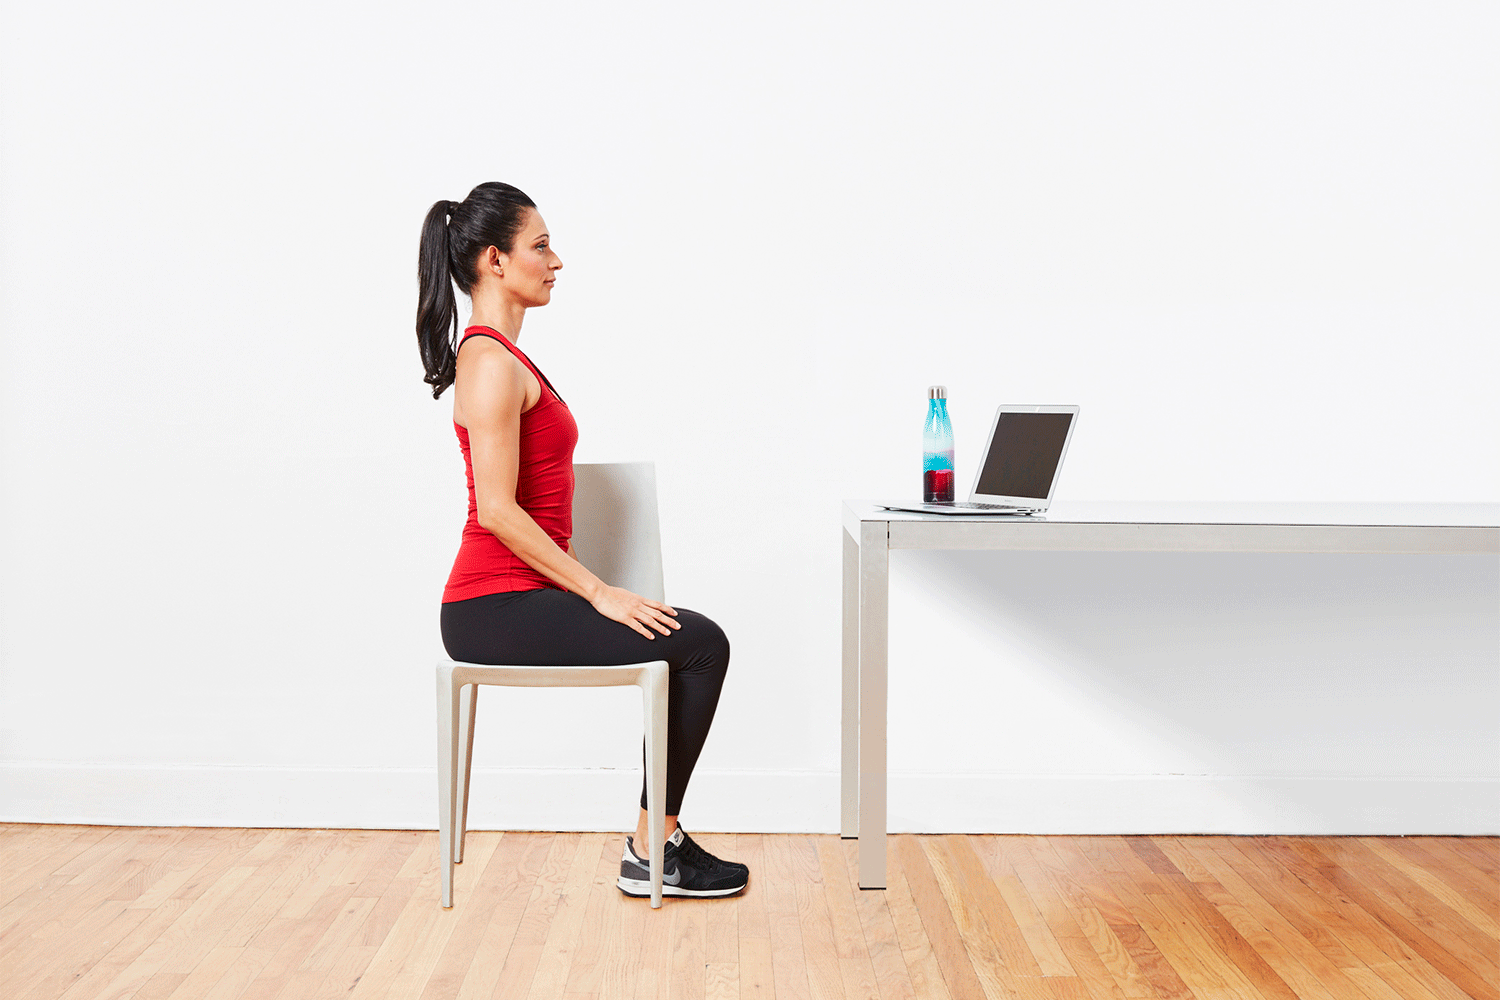 Back Twist Chair Exercises To Lose Weight